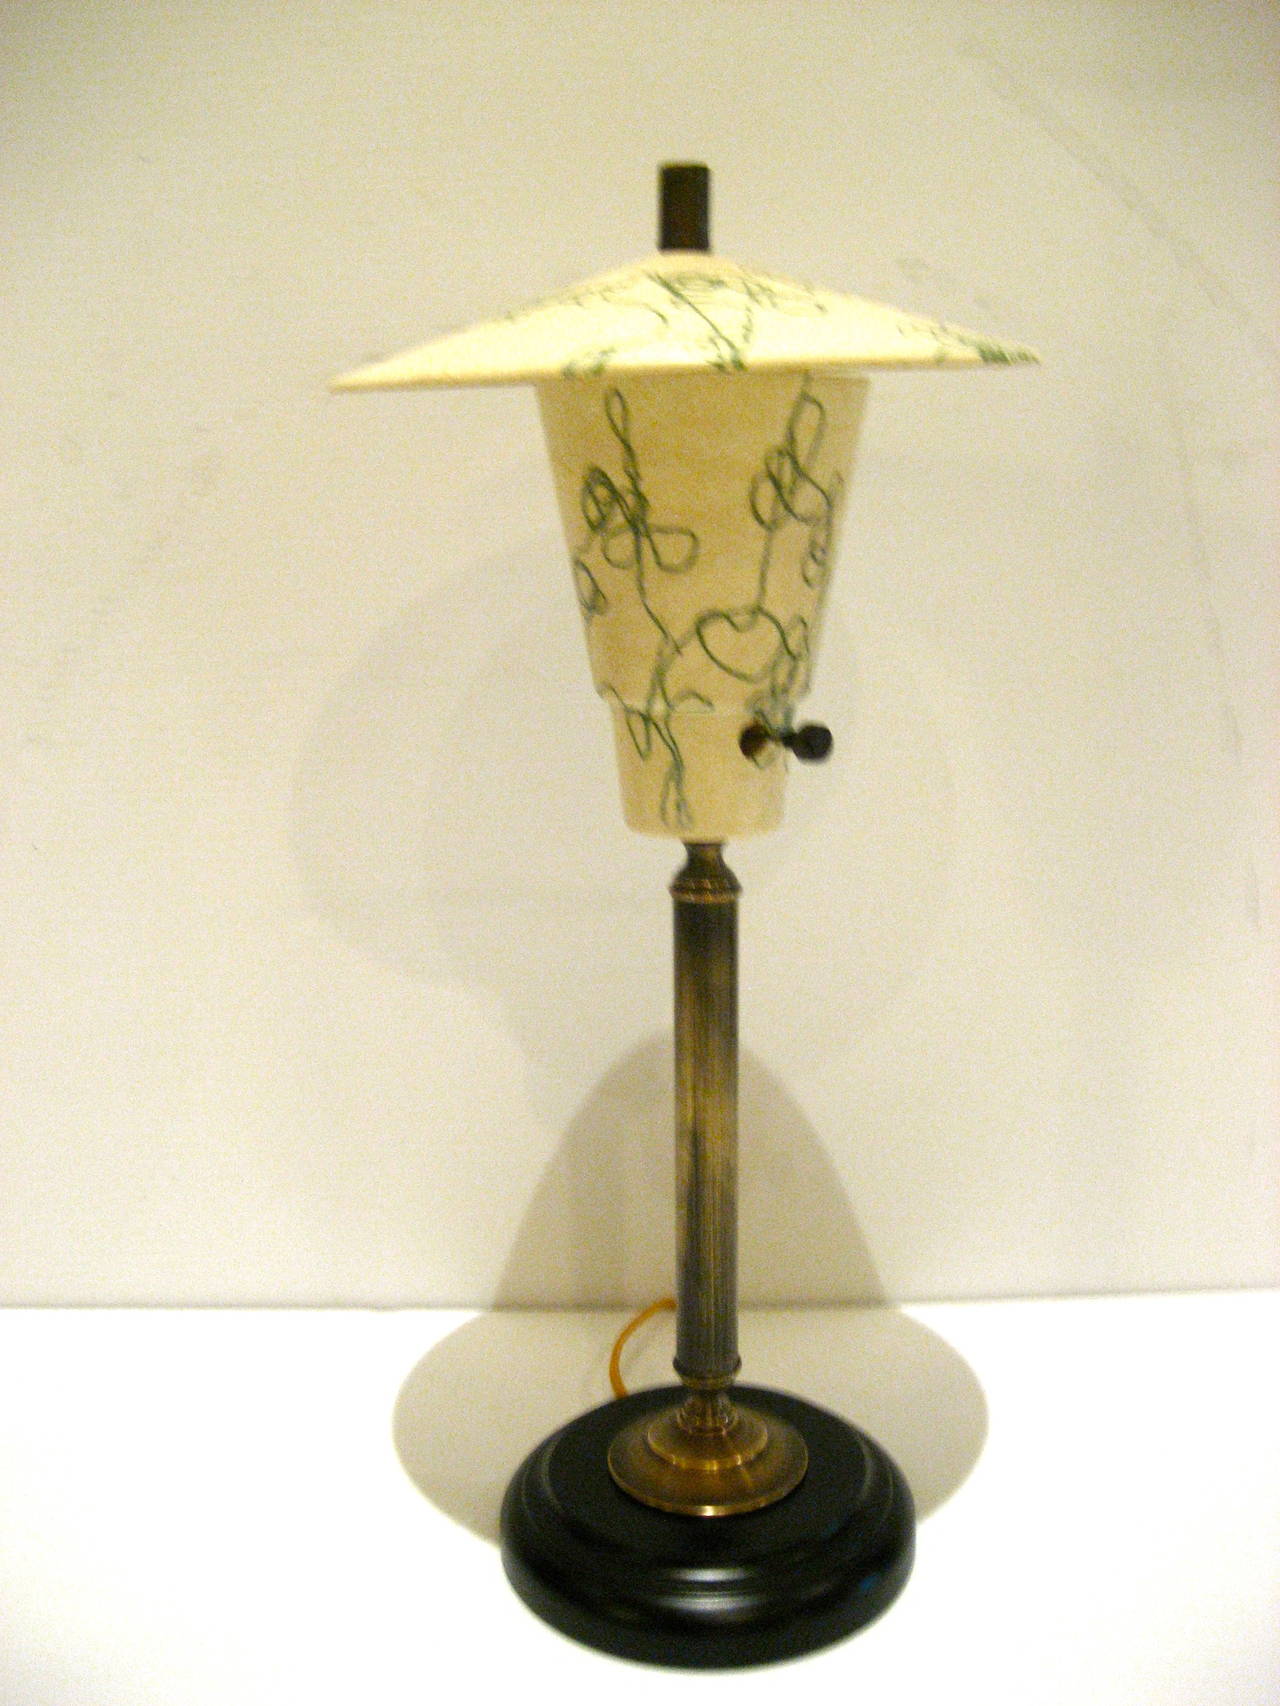 Beautiful and scarce 1950s American table or desk decorative lamp in great condition lamp has been rewired with gold silk cord and restored clip or on top shade with patinated brass fittings and black metal base, with script design in green and